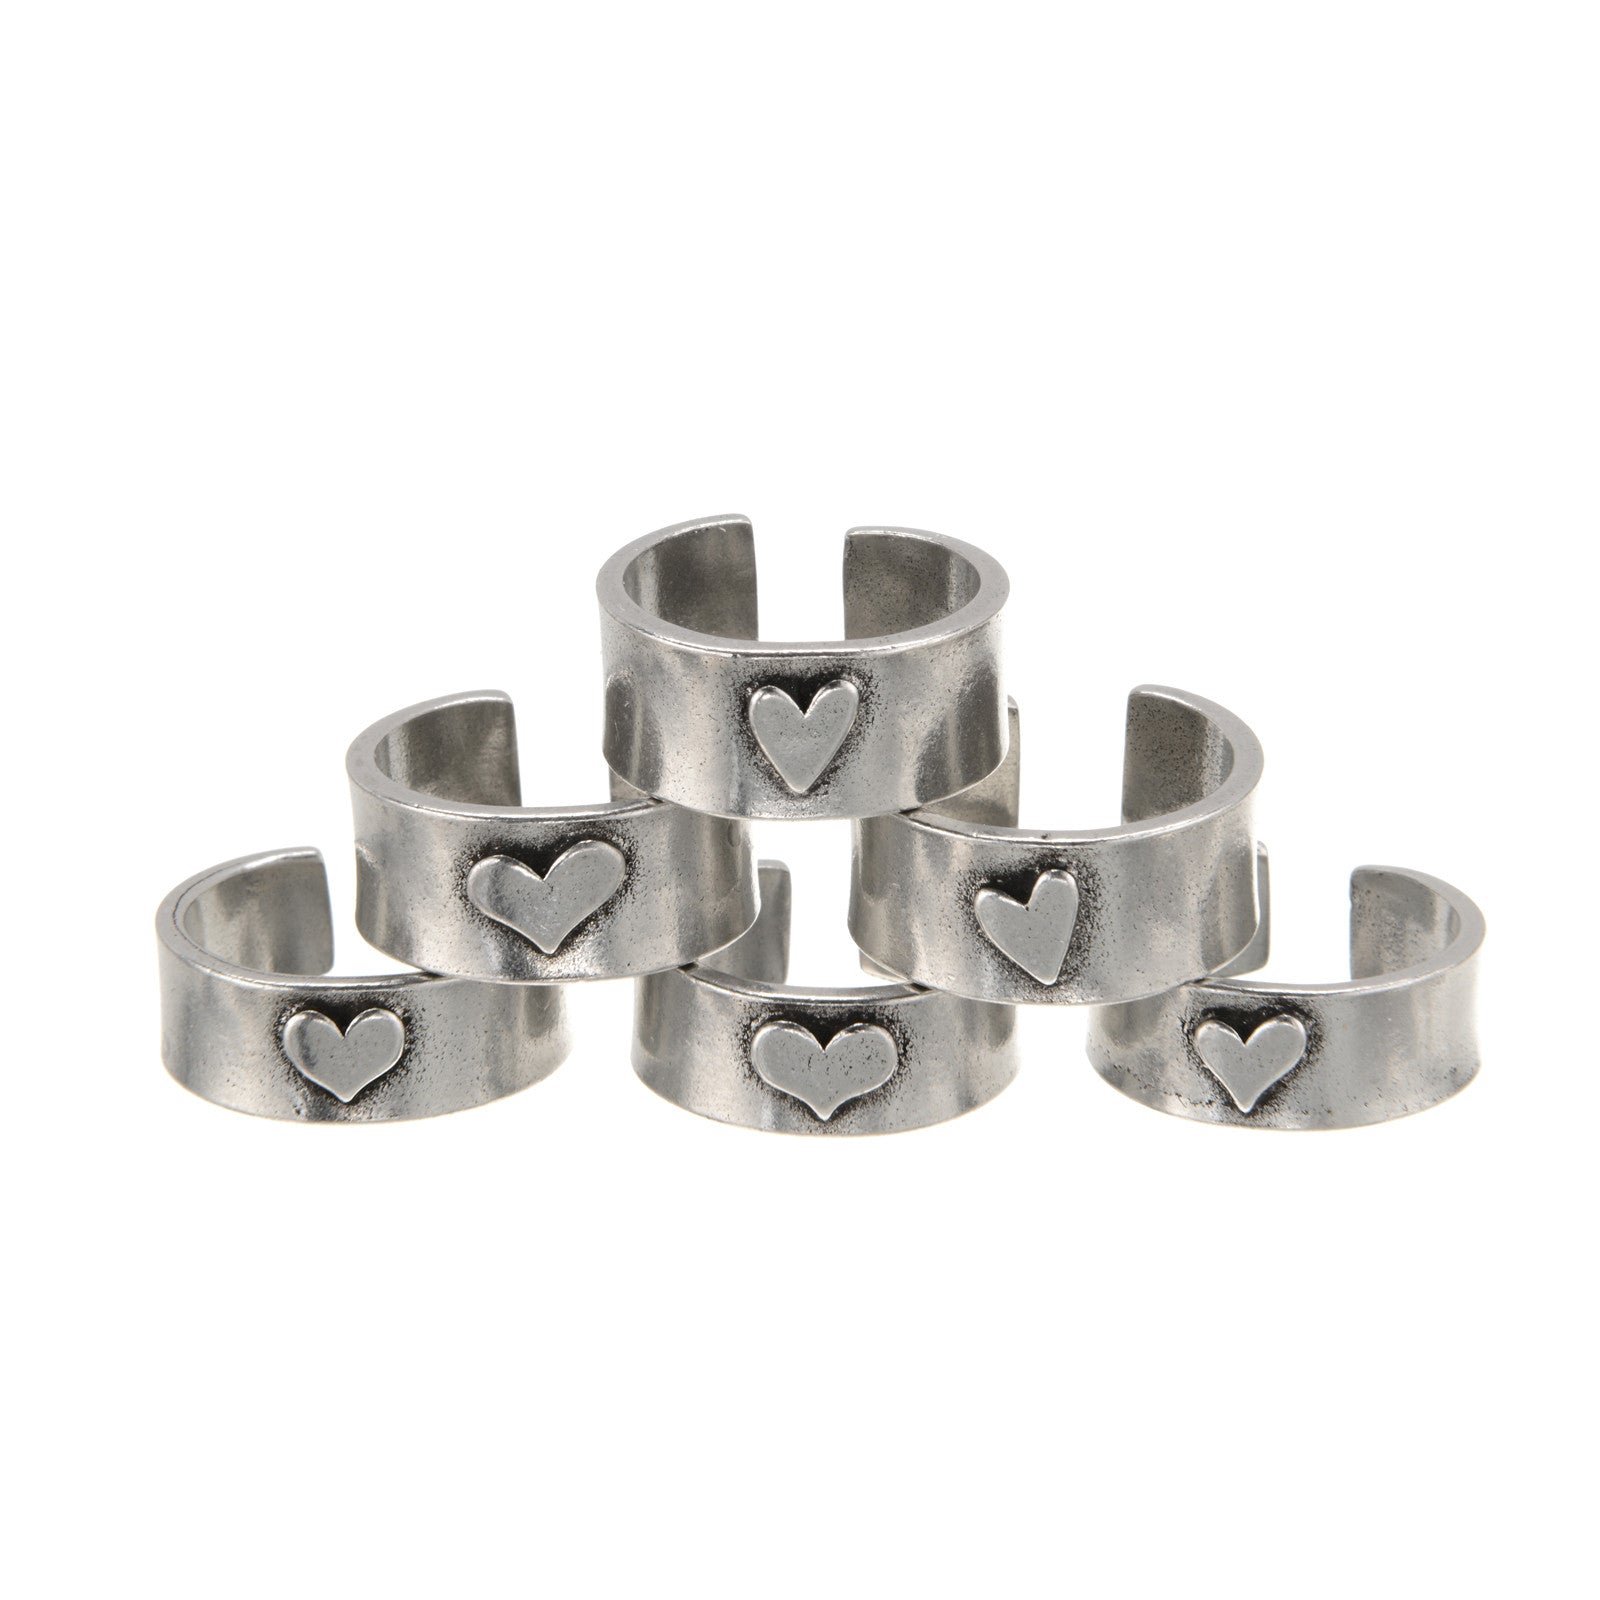 Stacked "Hearts of Gold" SWEET Ring